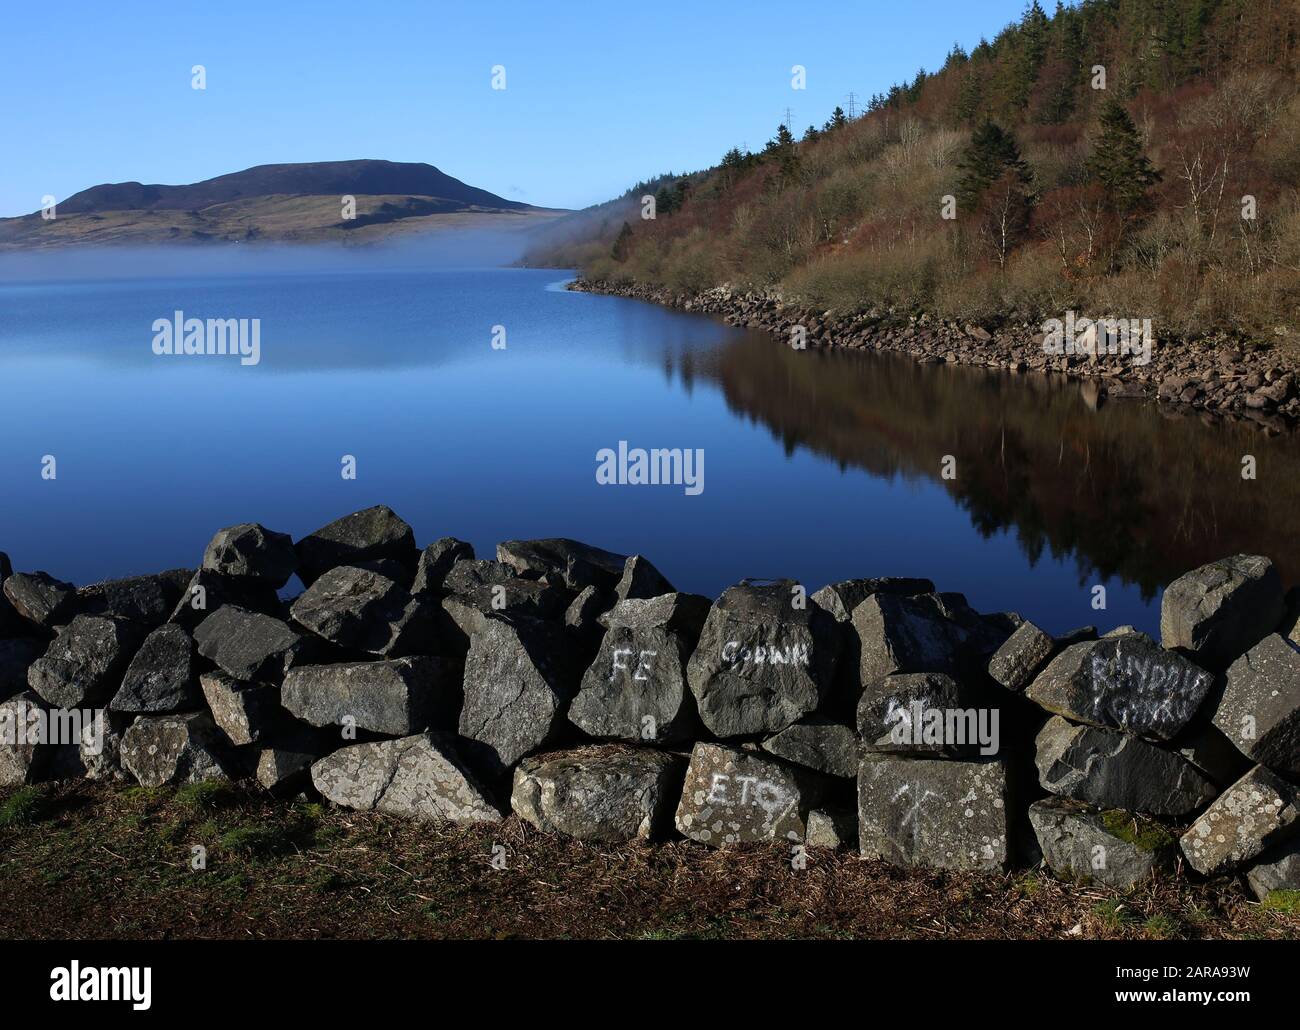 23 January 2020, United Kingdom, Fron-goch: The Llyn Celyn Reservoir in  Wales is the grave of a small village that was flooded to create a water  reservoir for the English city of